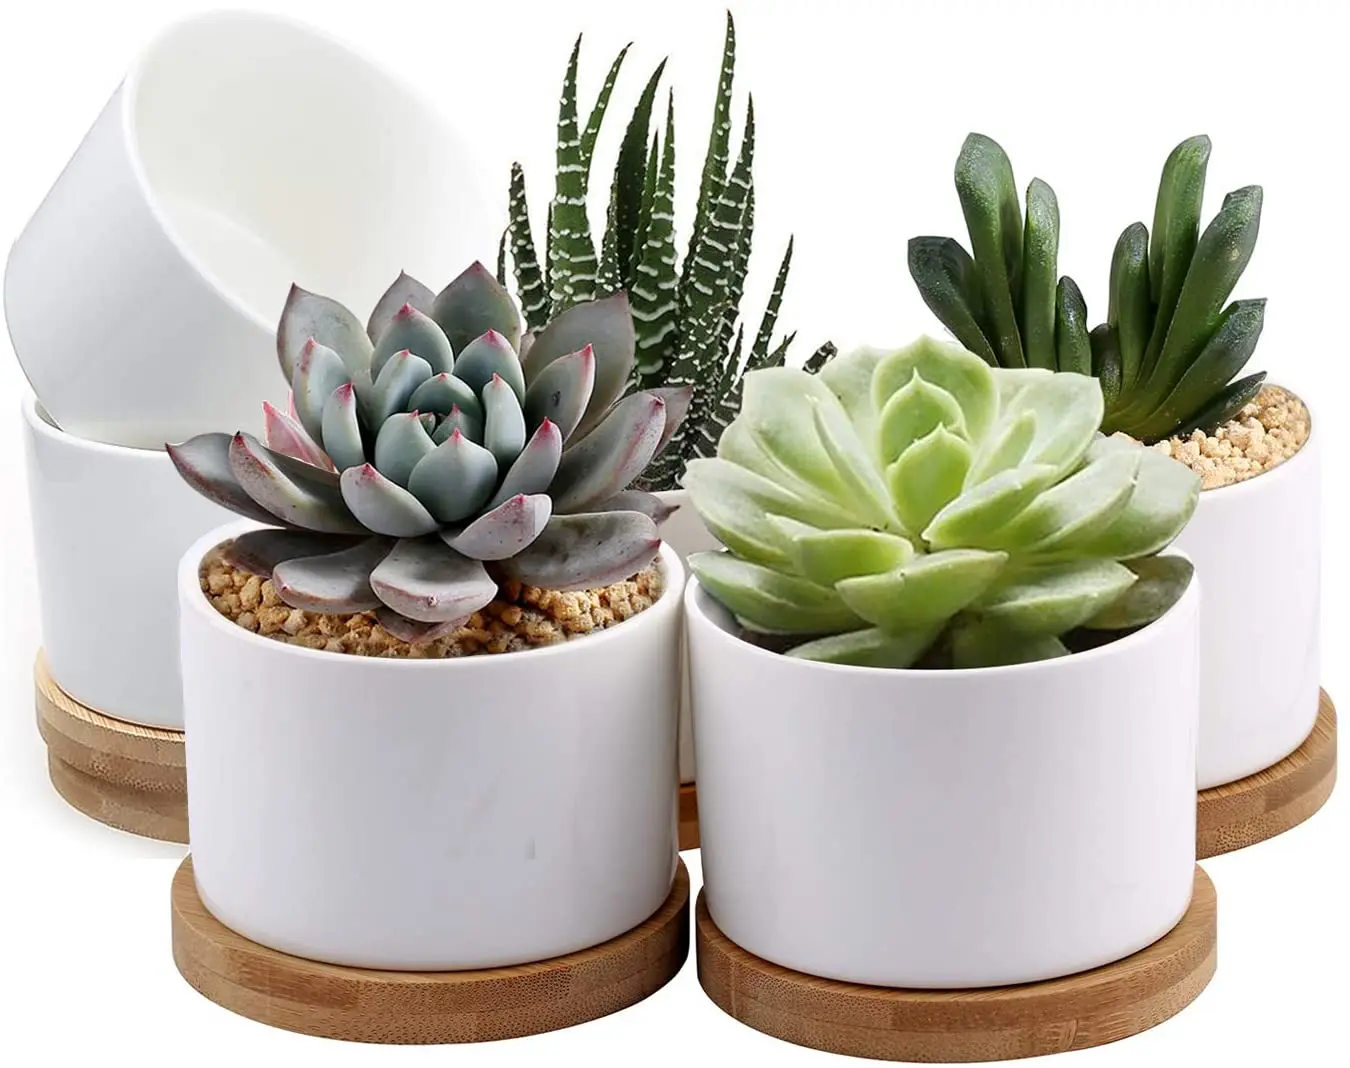 Hot Sale Products In 10 Top 10 Flower Pots Planters Garden Flower Pot For  Garden Plant Succulent Plant Pot With Bamboo Tray   Buy Flower Pots ...